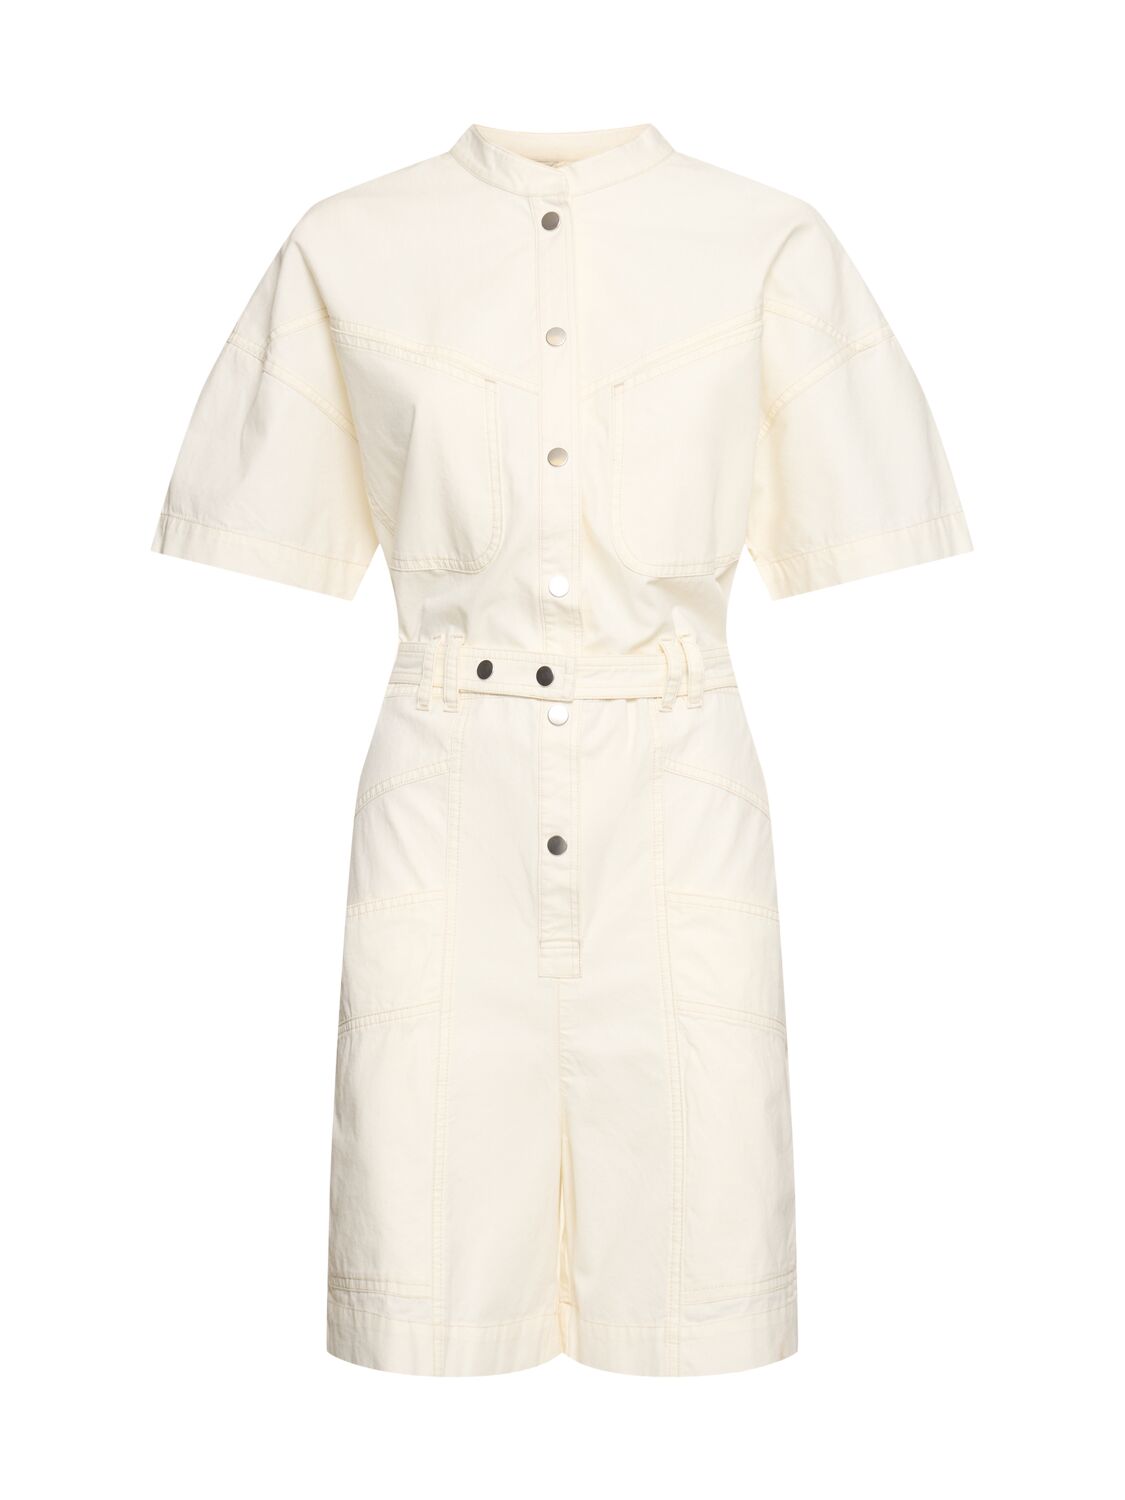 Kiara Belted Cotton Overalls